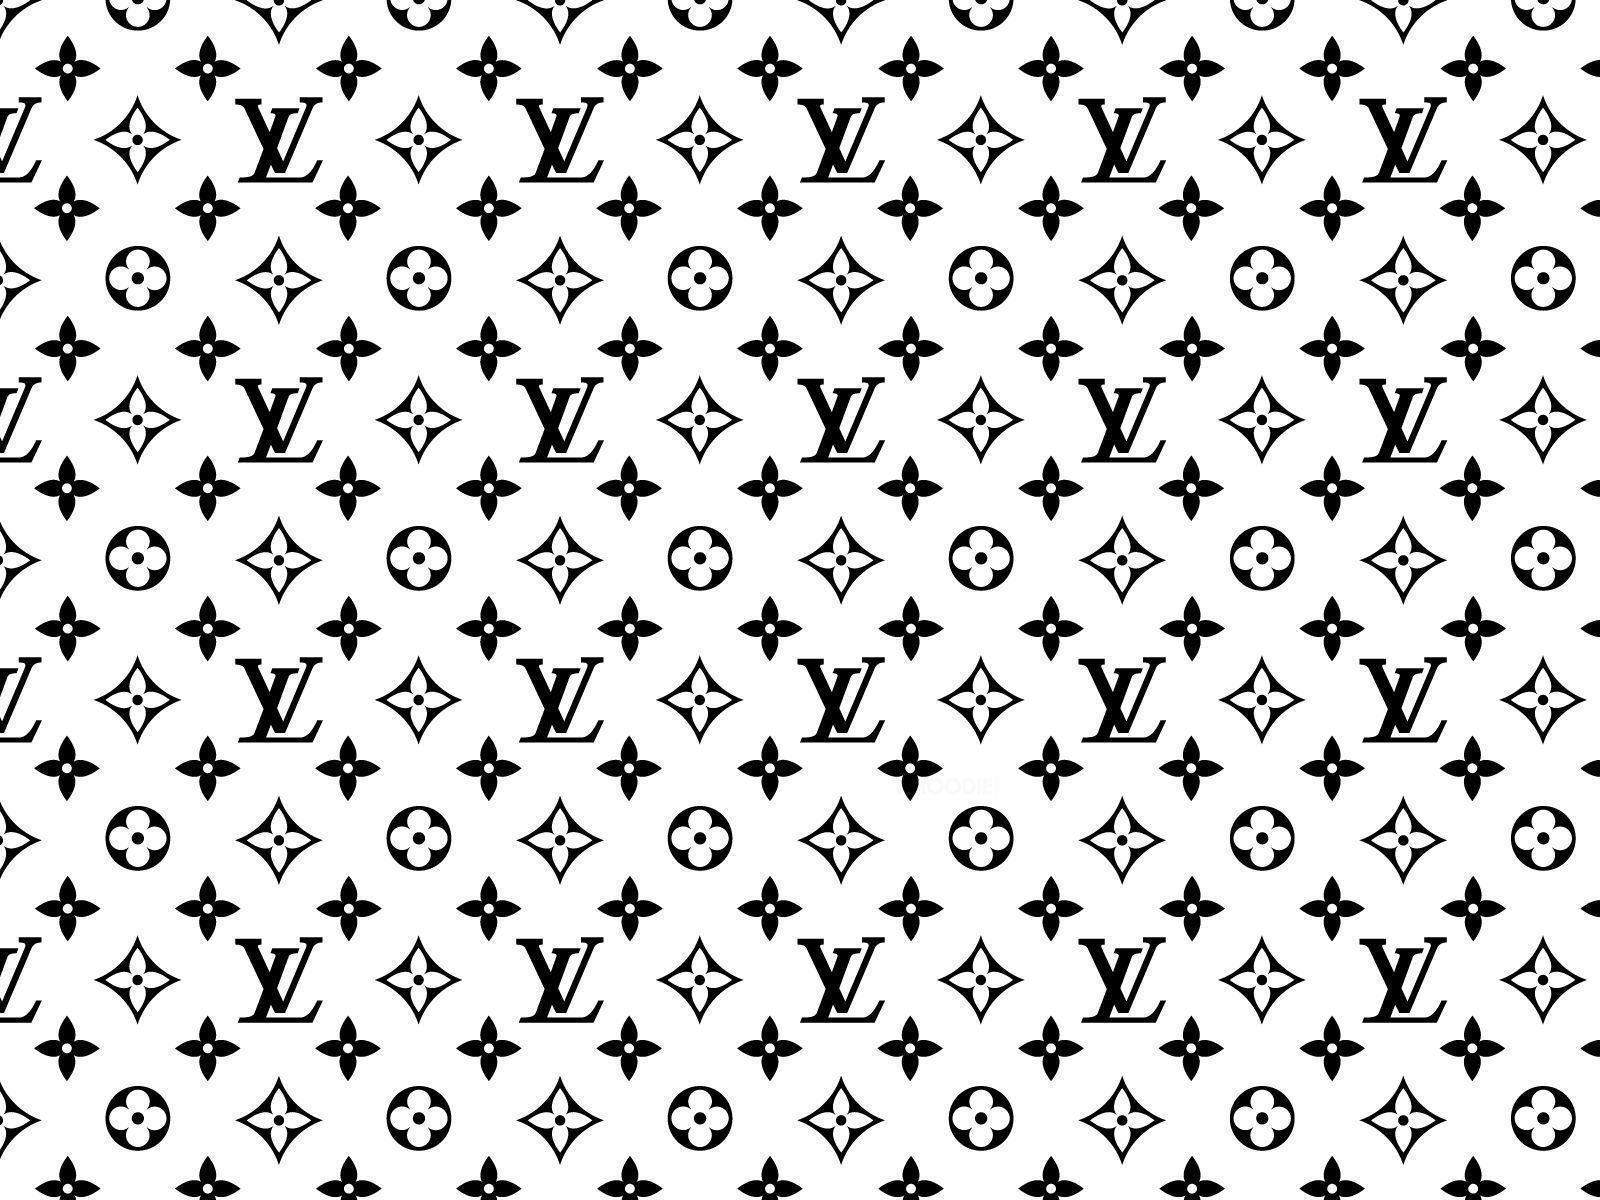 Louis Vuitton iPhone Wallpapers Group (53+)